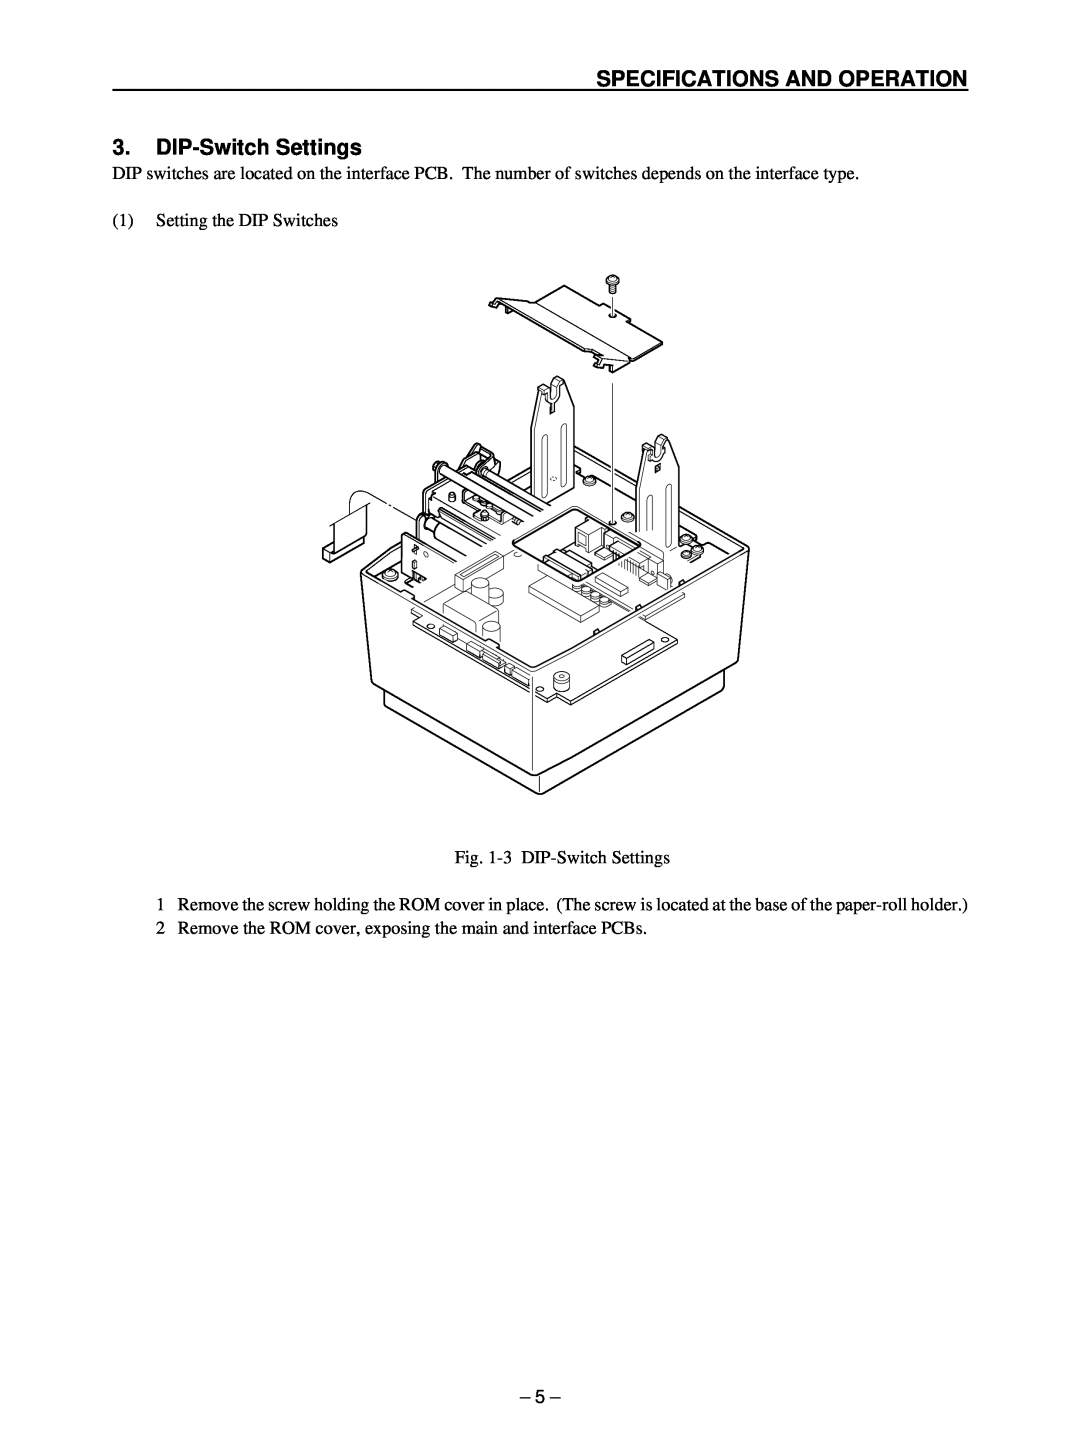 Star Micronics TSP400 technical manual SPECIFICATIONS AND OPERATION 3. DIP-Switch Settings 